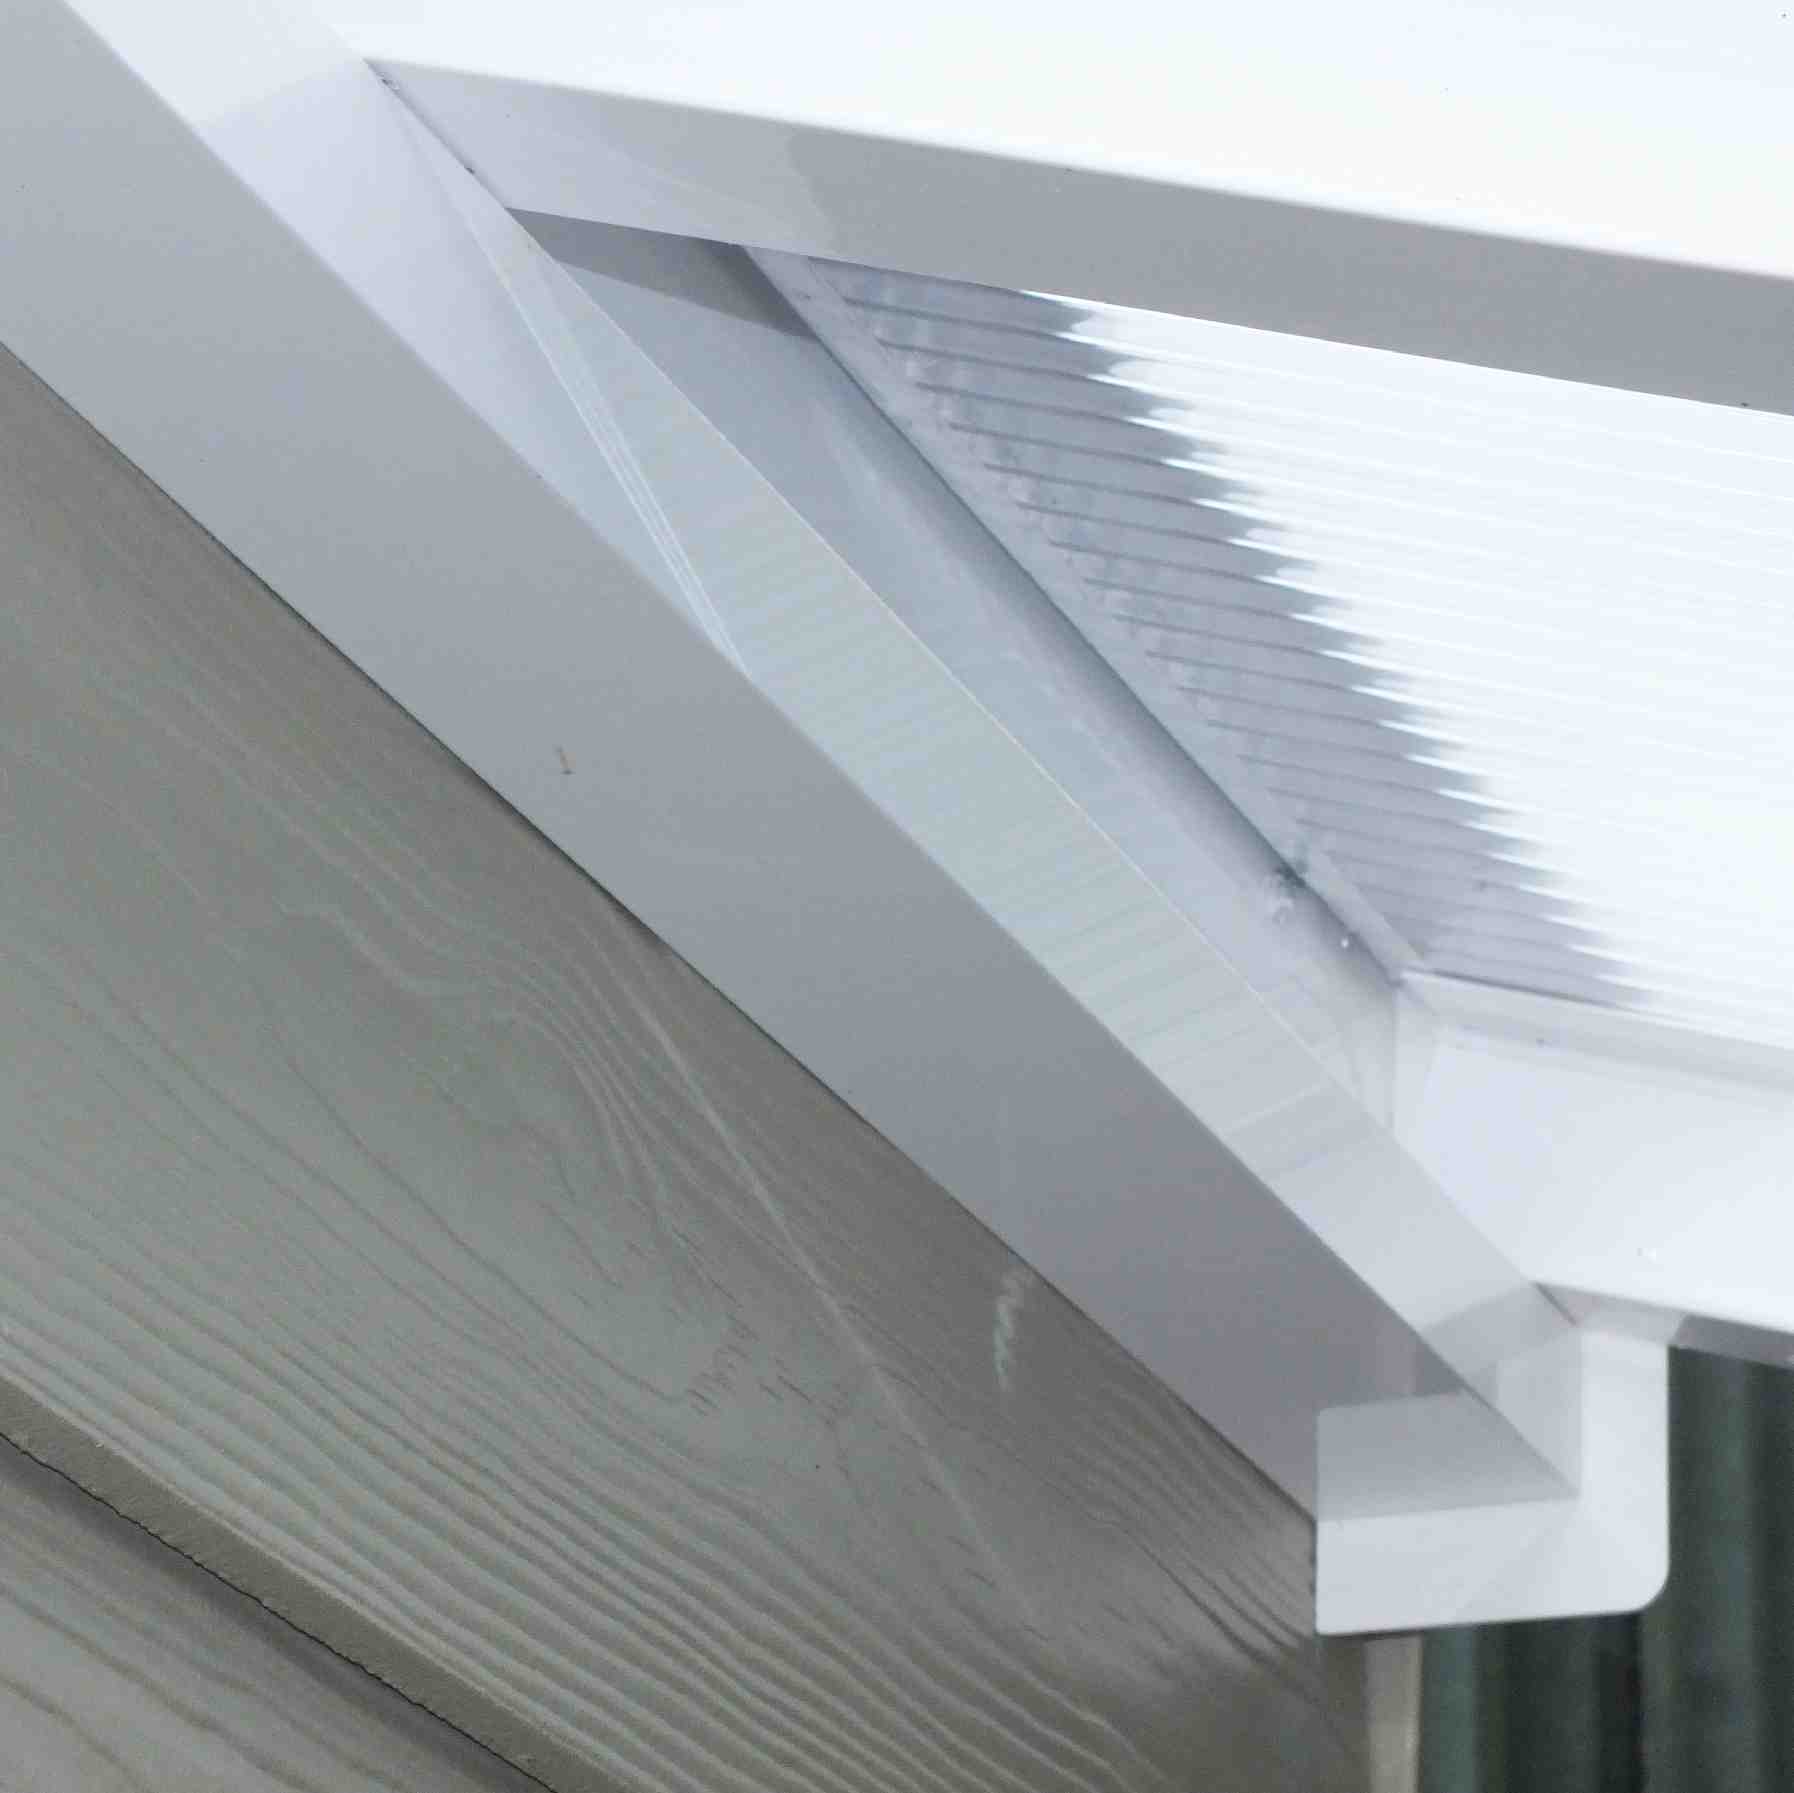 Great deals on Omega Verandah White with 6mm Glass Clear Plate Polycarbonate Glazing - 9.8m (W) x 2.5m (P), (5) Supporting Posts